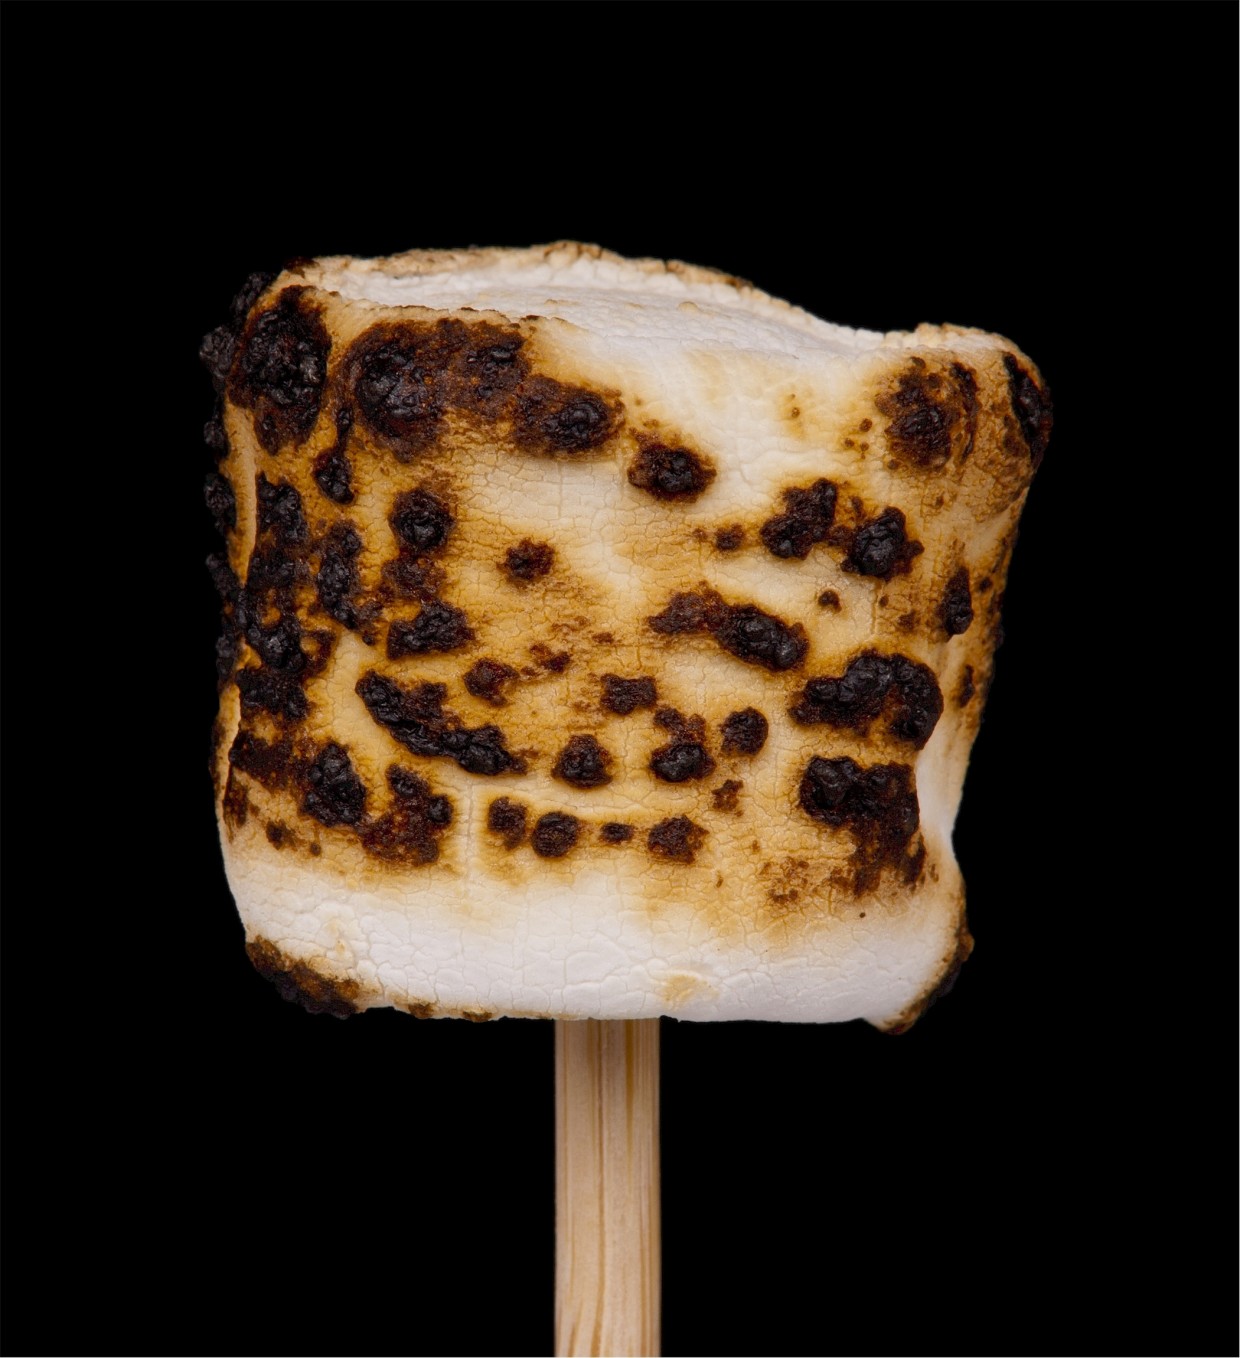 Ooey Gooey S’mores…with a Twist!